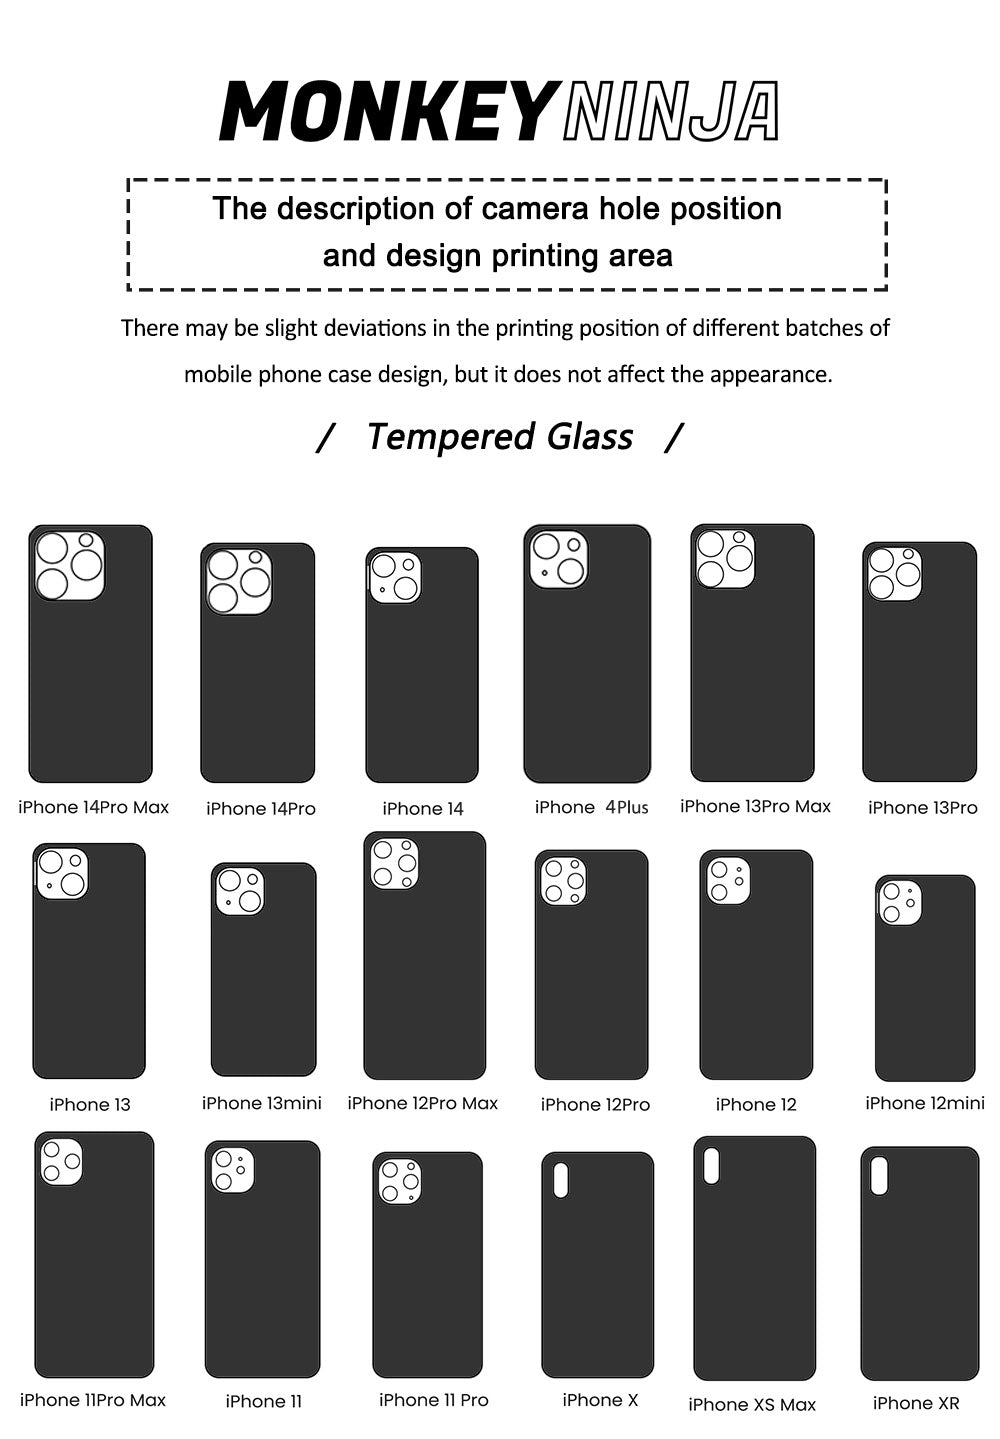 Solo Leveling Kaisel Tempered Glass Soft Silicone iPhone Case